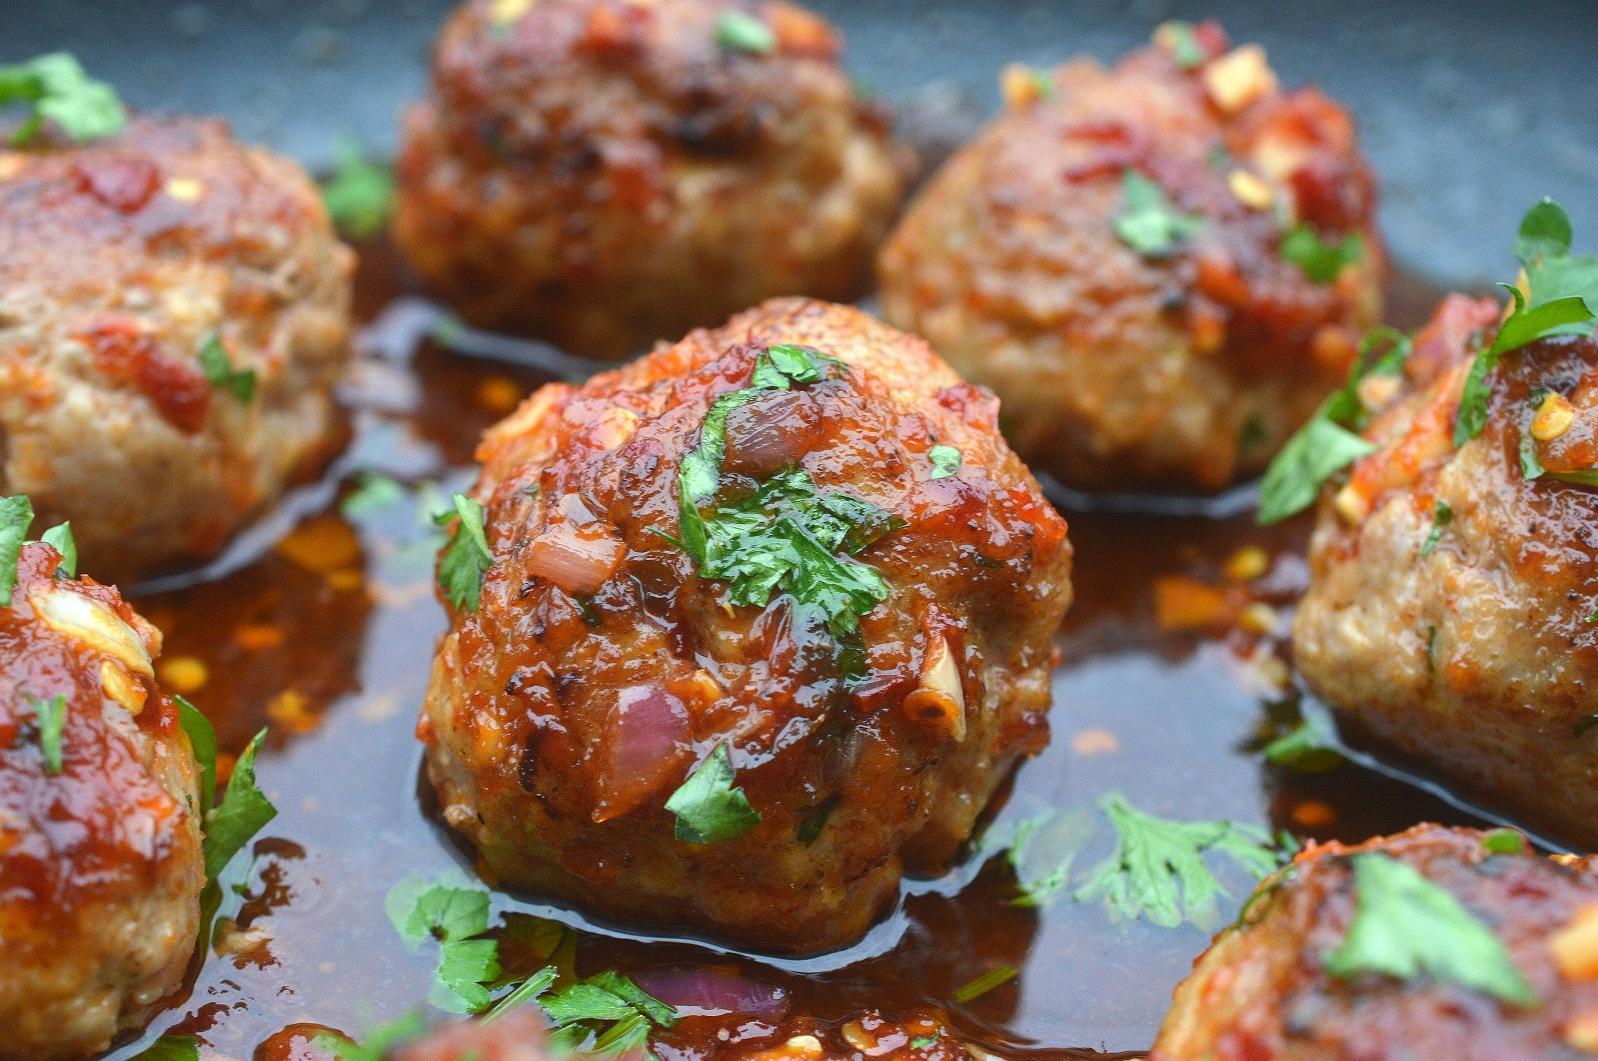  You won't be able to resist dipping these juicy meatballs in the flavorful sauce.